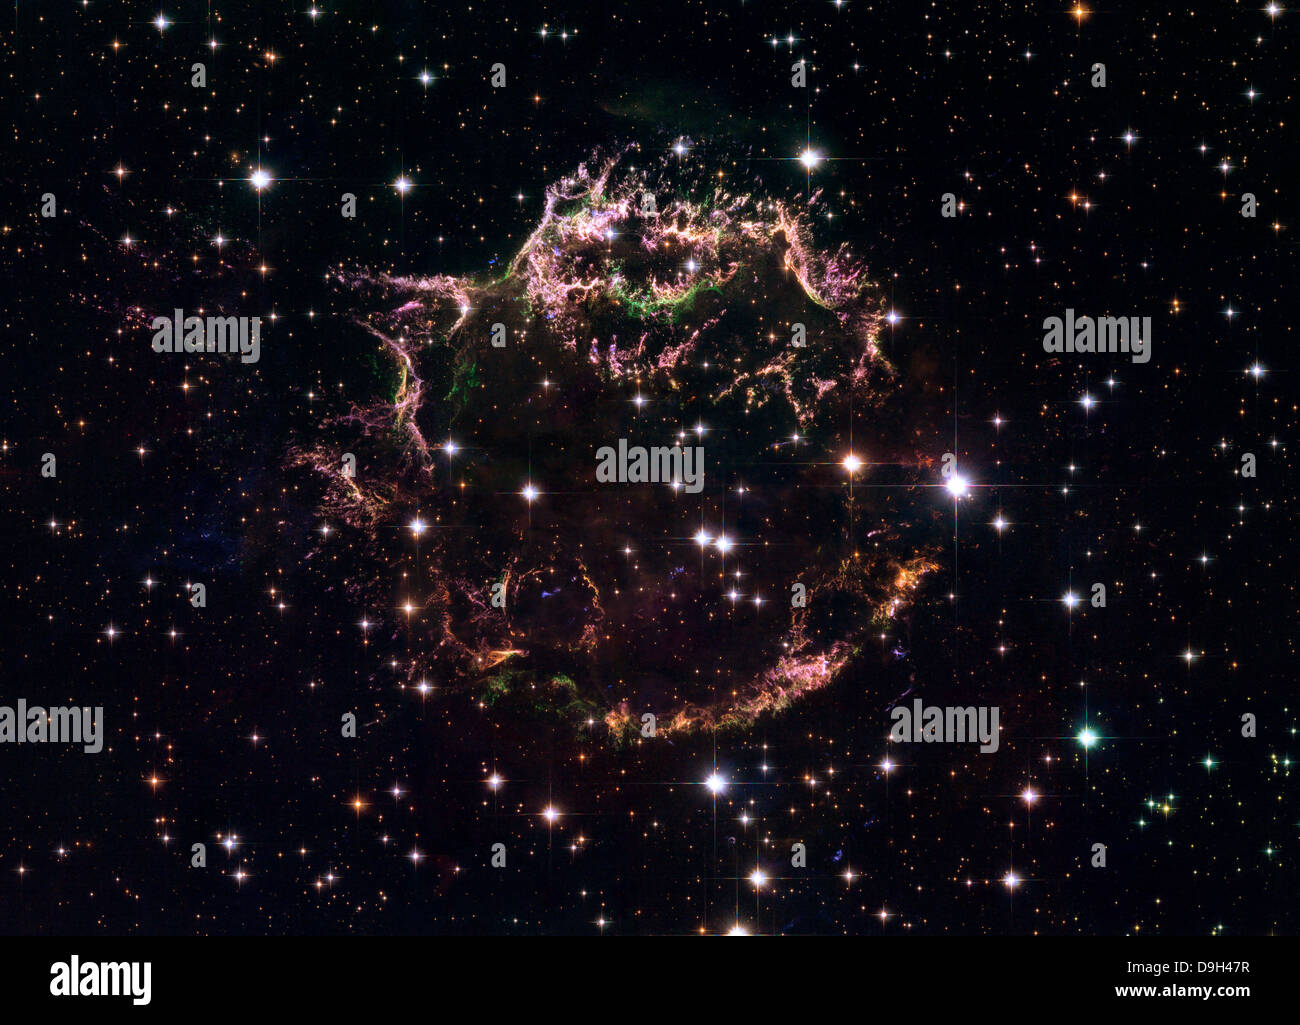 A detailed view at the tattered remains of a supernova explosion known as Cassiopeia A. Stock Photo